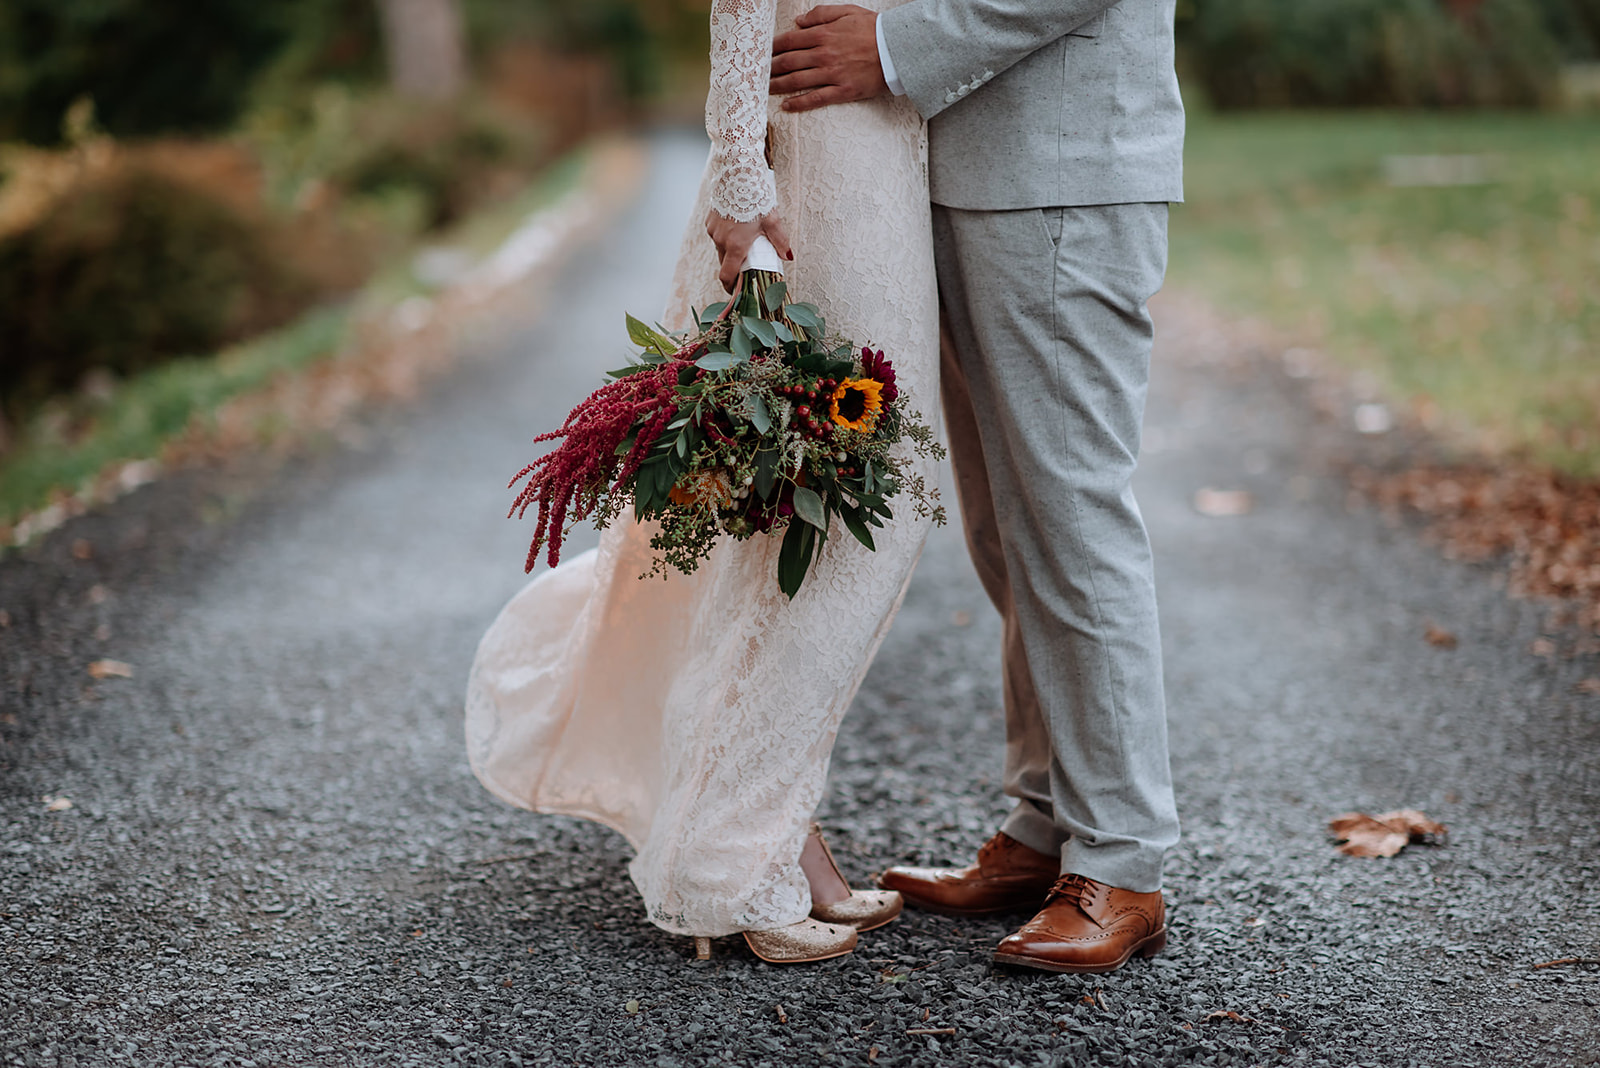 Up close image of couples legs with bride holding her bouquet and dress blowing in the wind.